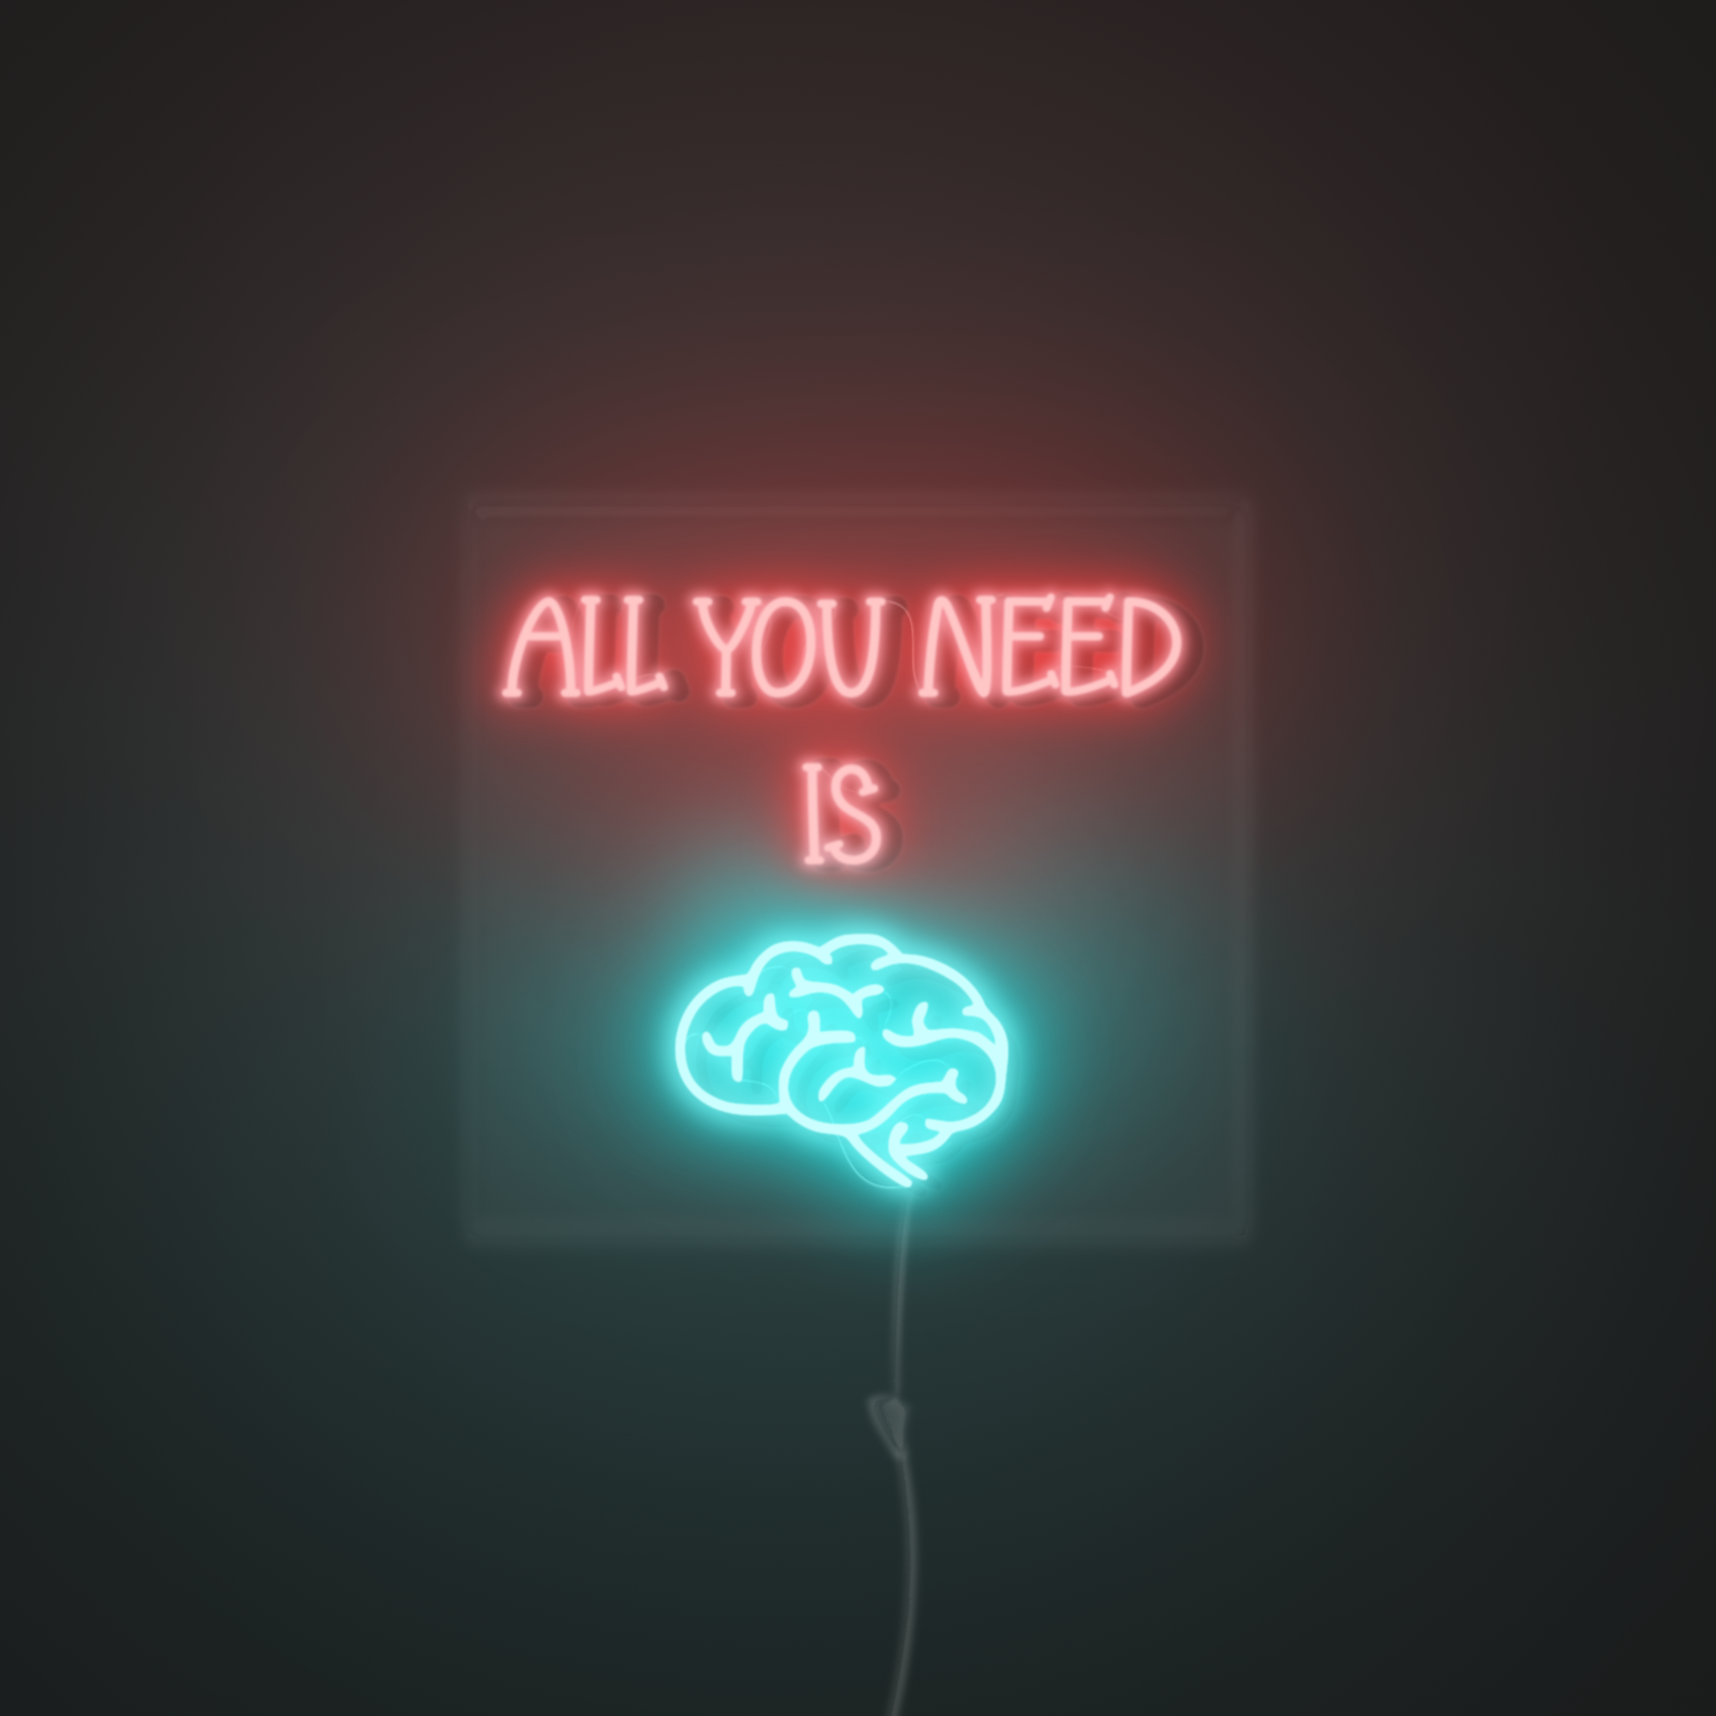 All you need is neonerdy.design